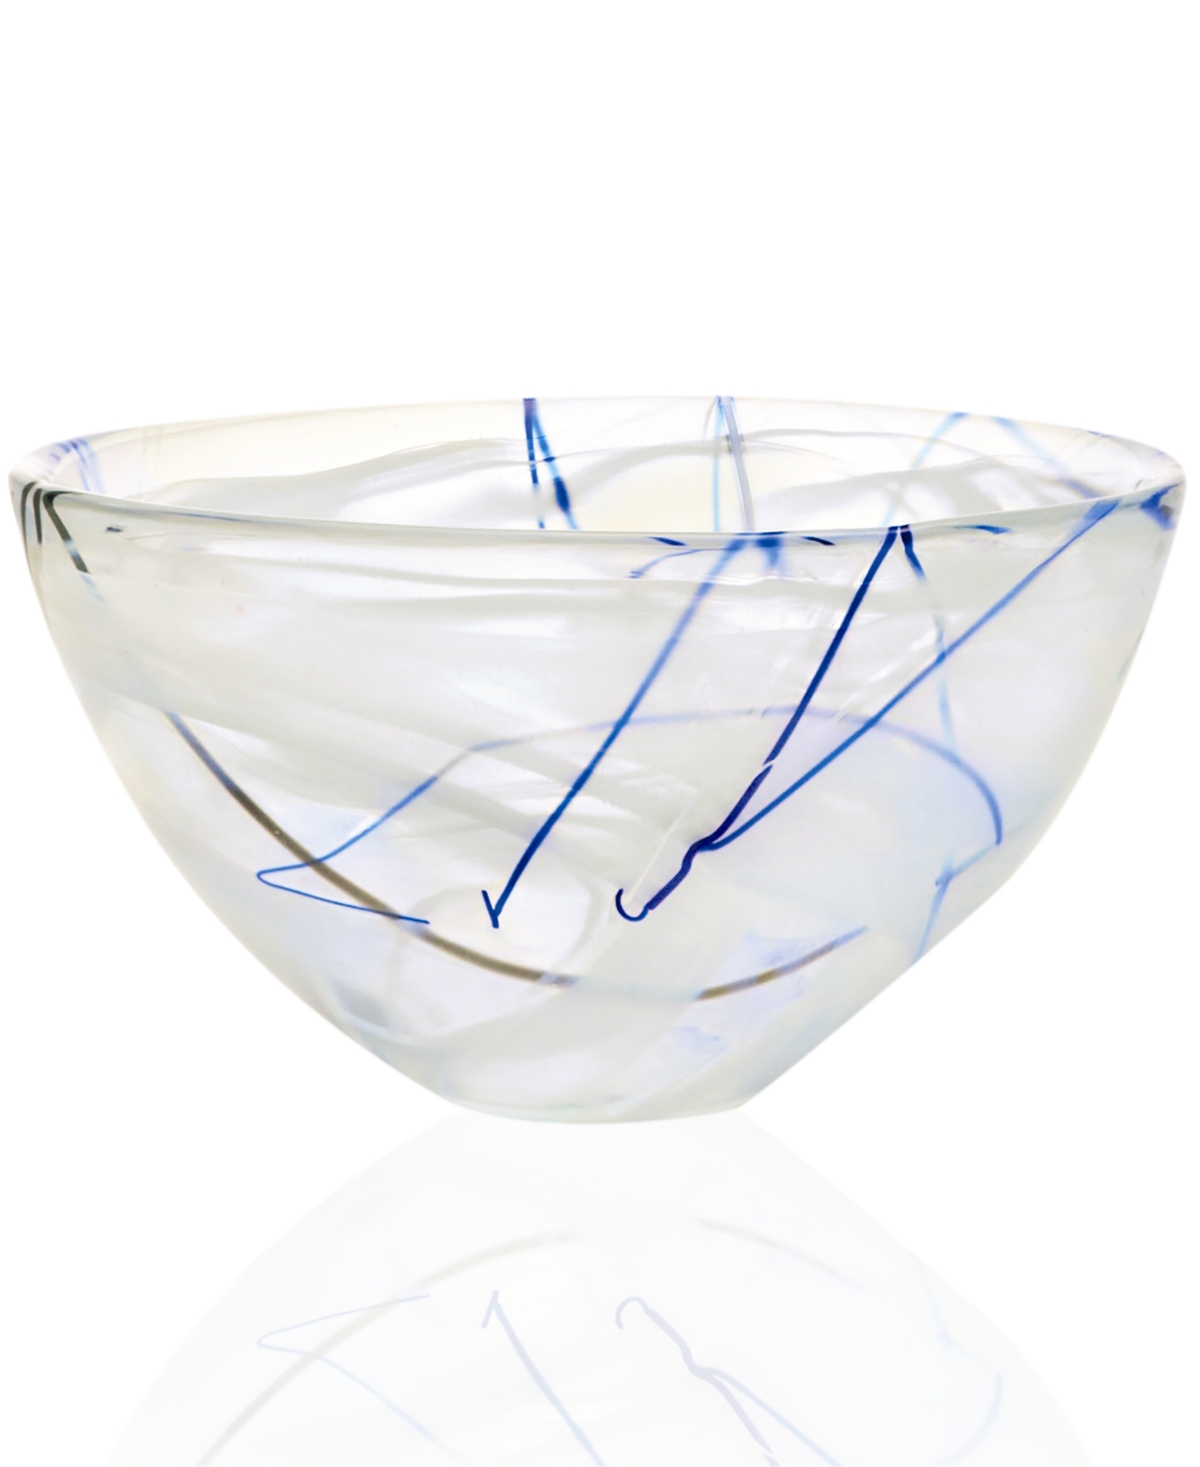 Contrast 5" Bowl - White